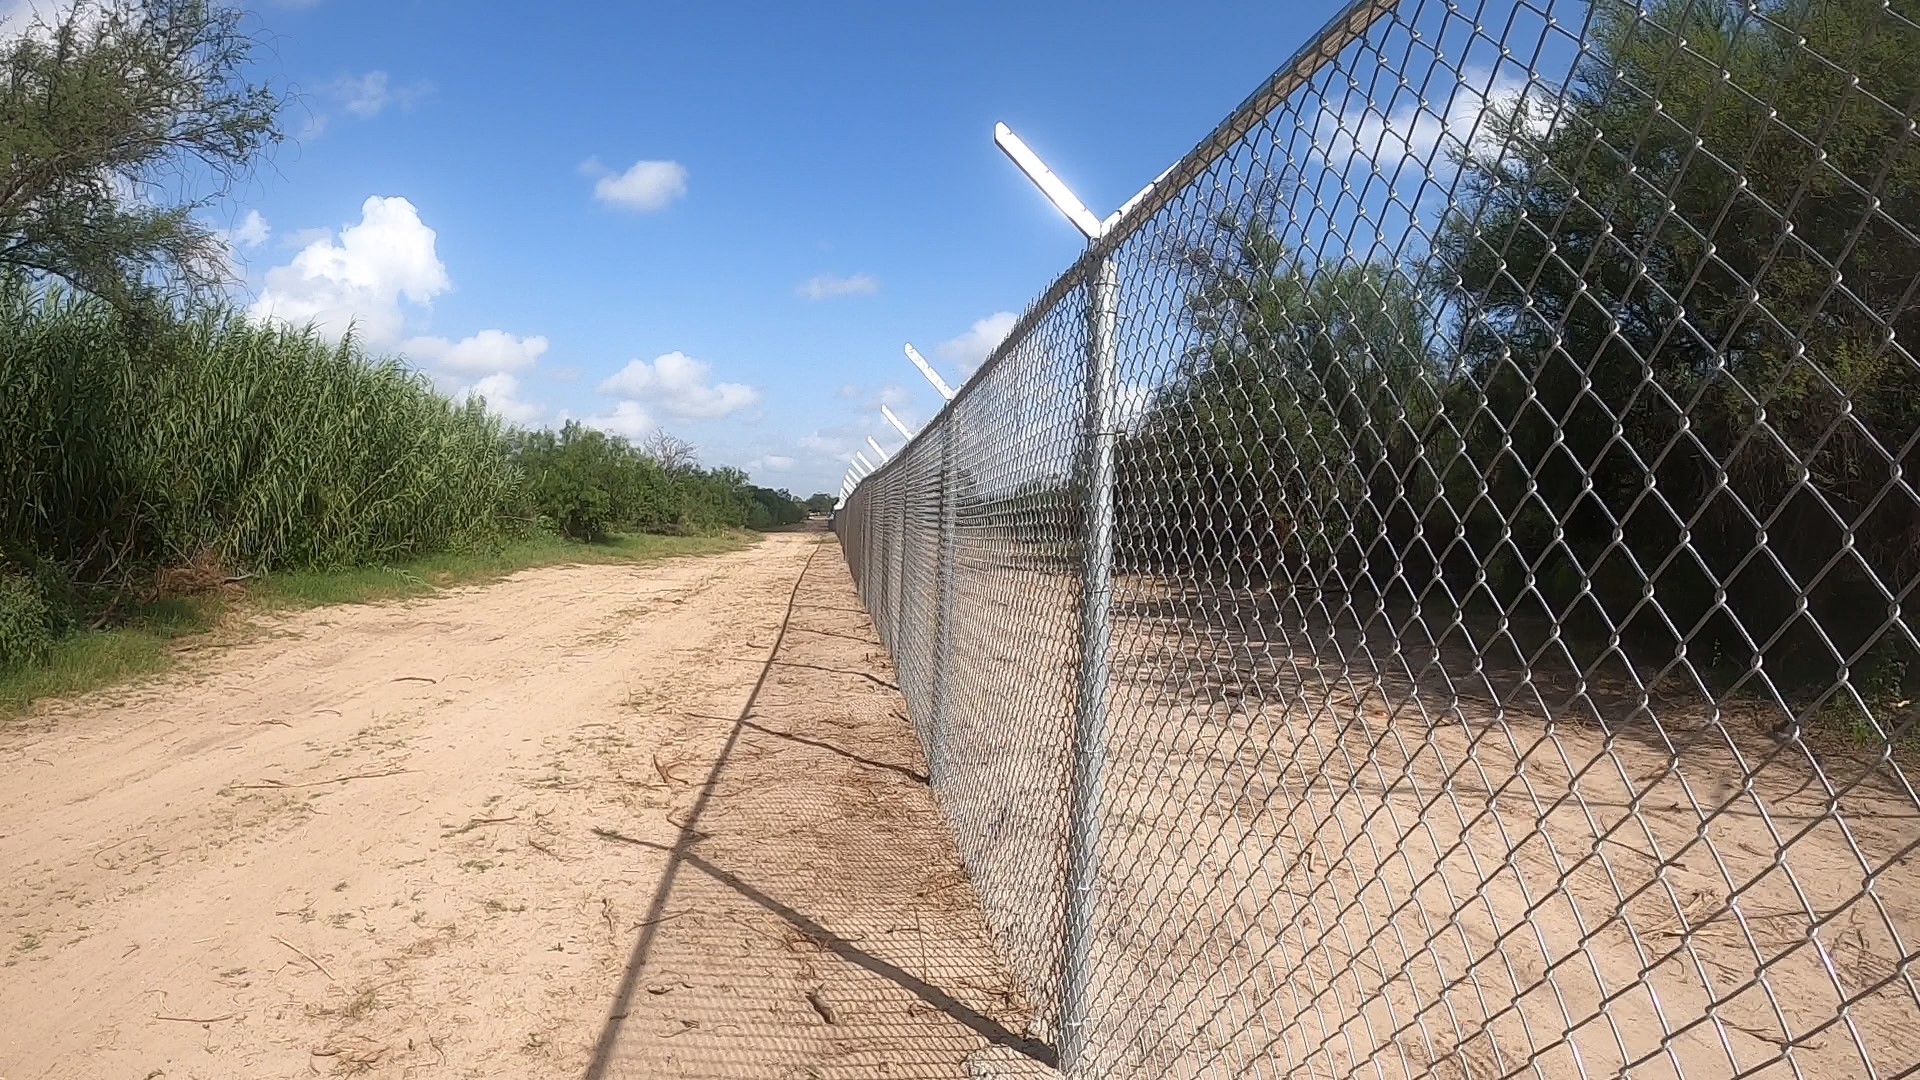 KENS 5 got exclusive access to see the barrier. DPS said it will allow authorities to arrest and prosecute migrants on state criminal trespass charges.